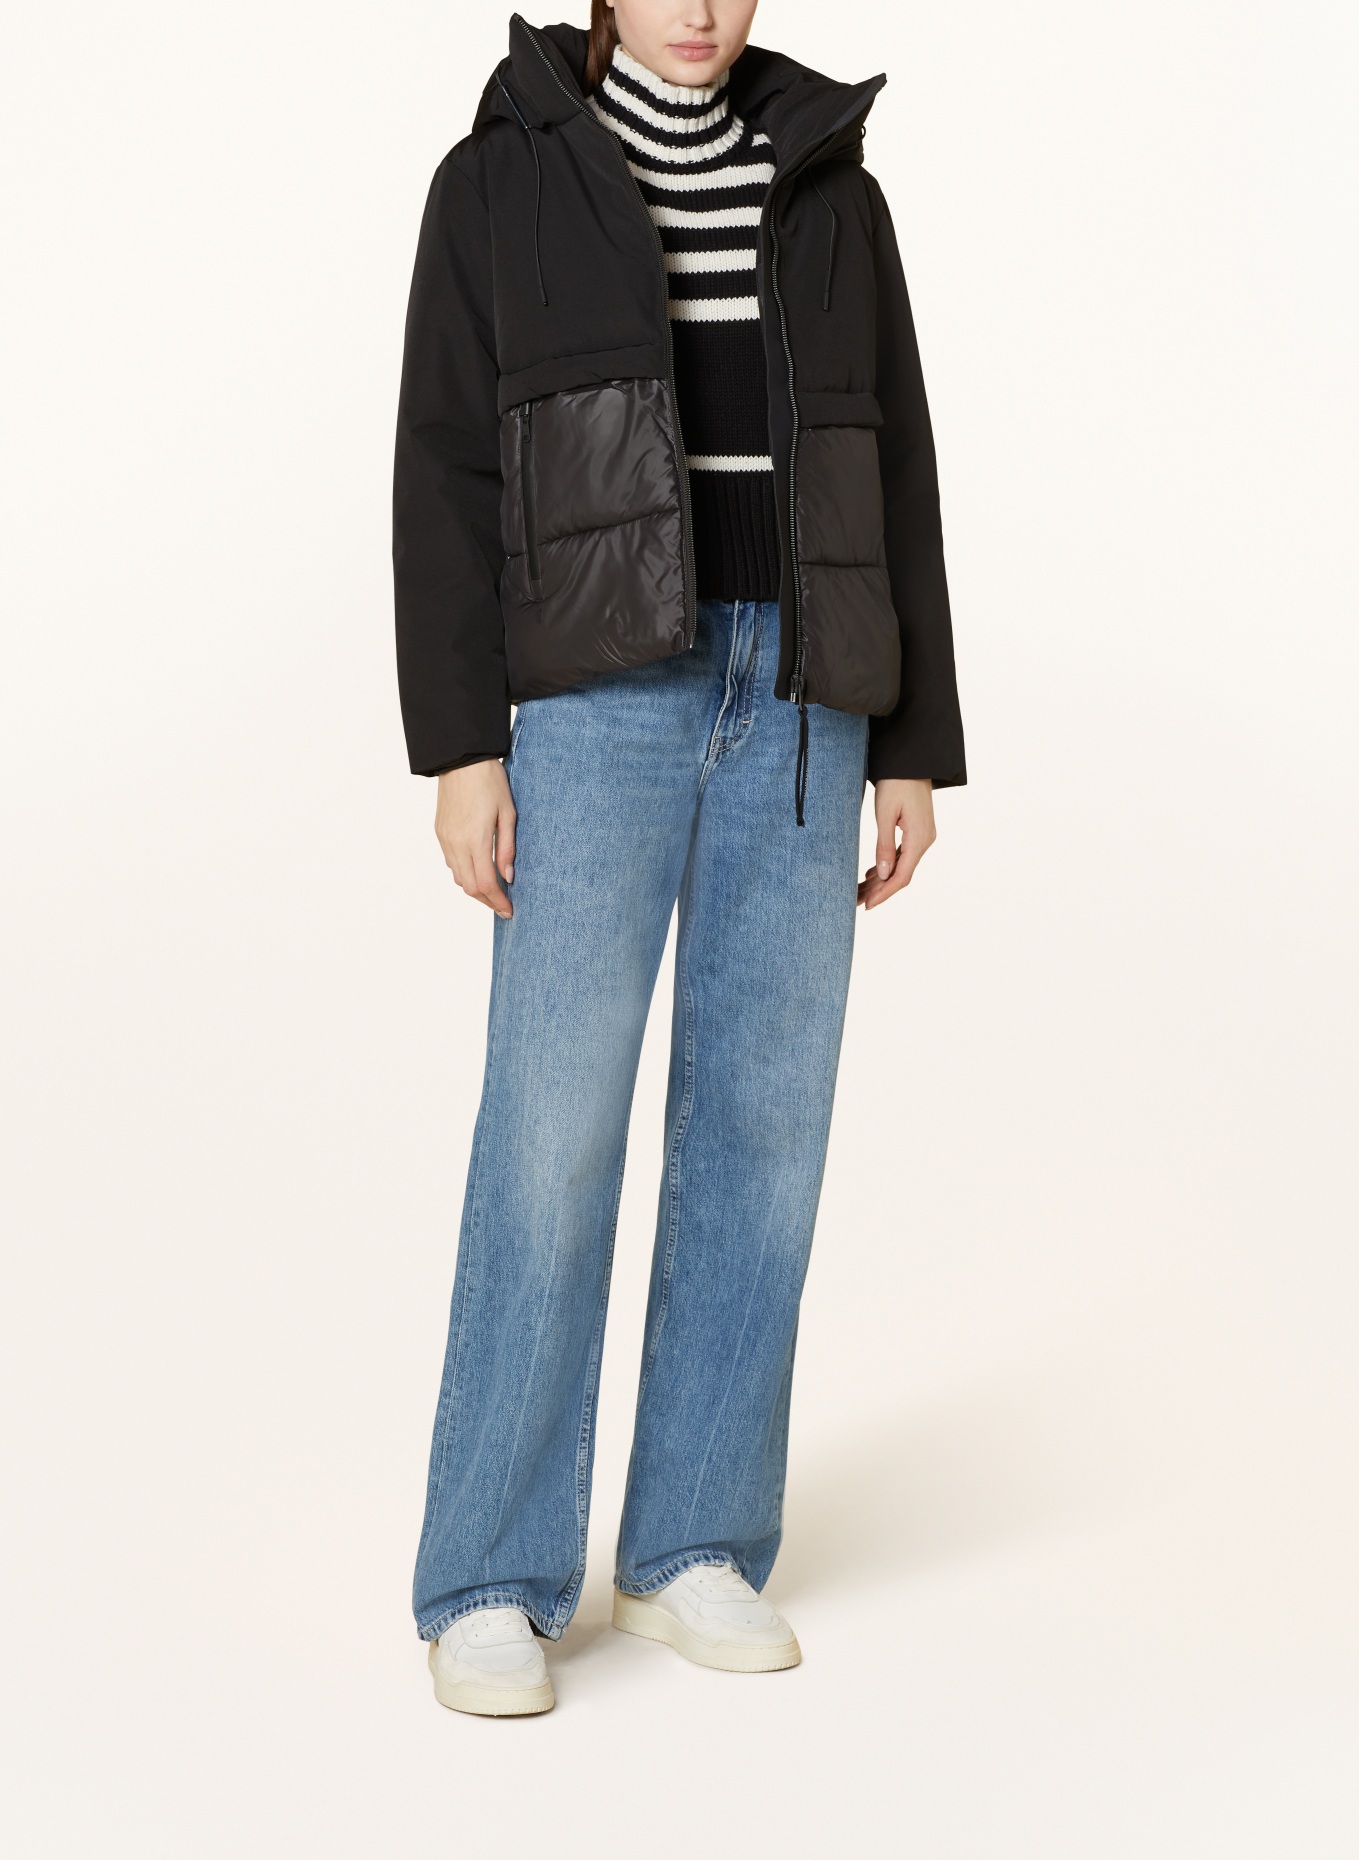 khujo Quilted jacket WAYRA in mixed materials in black